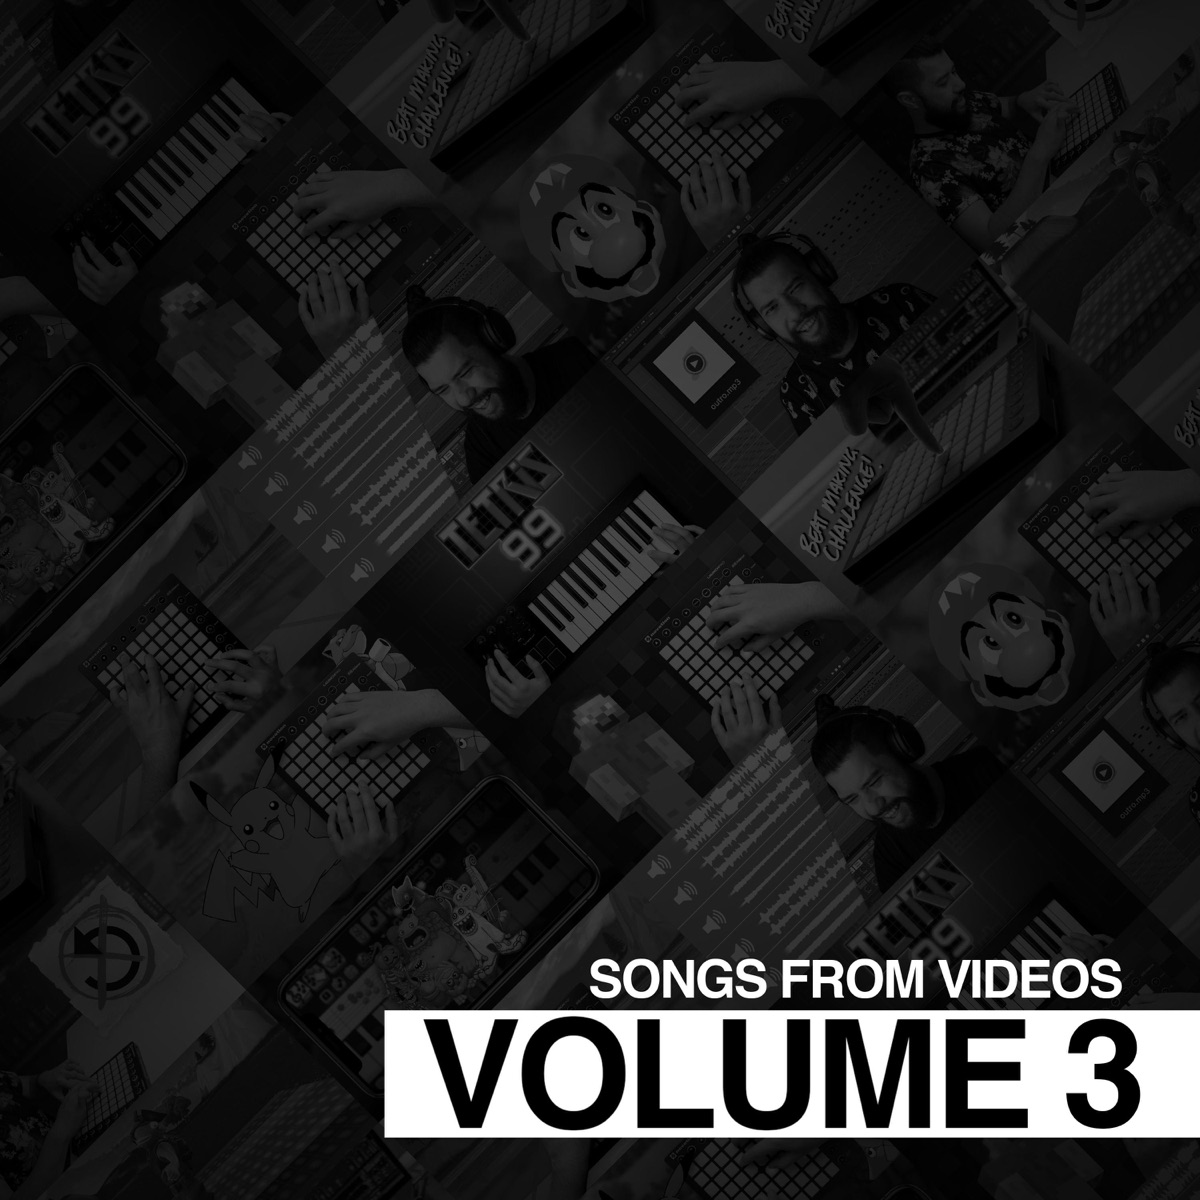 Visum pasta sagging Songs from Videos: Volume 1 by Levi Niha on Apple Music